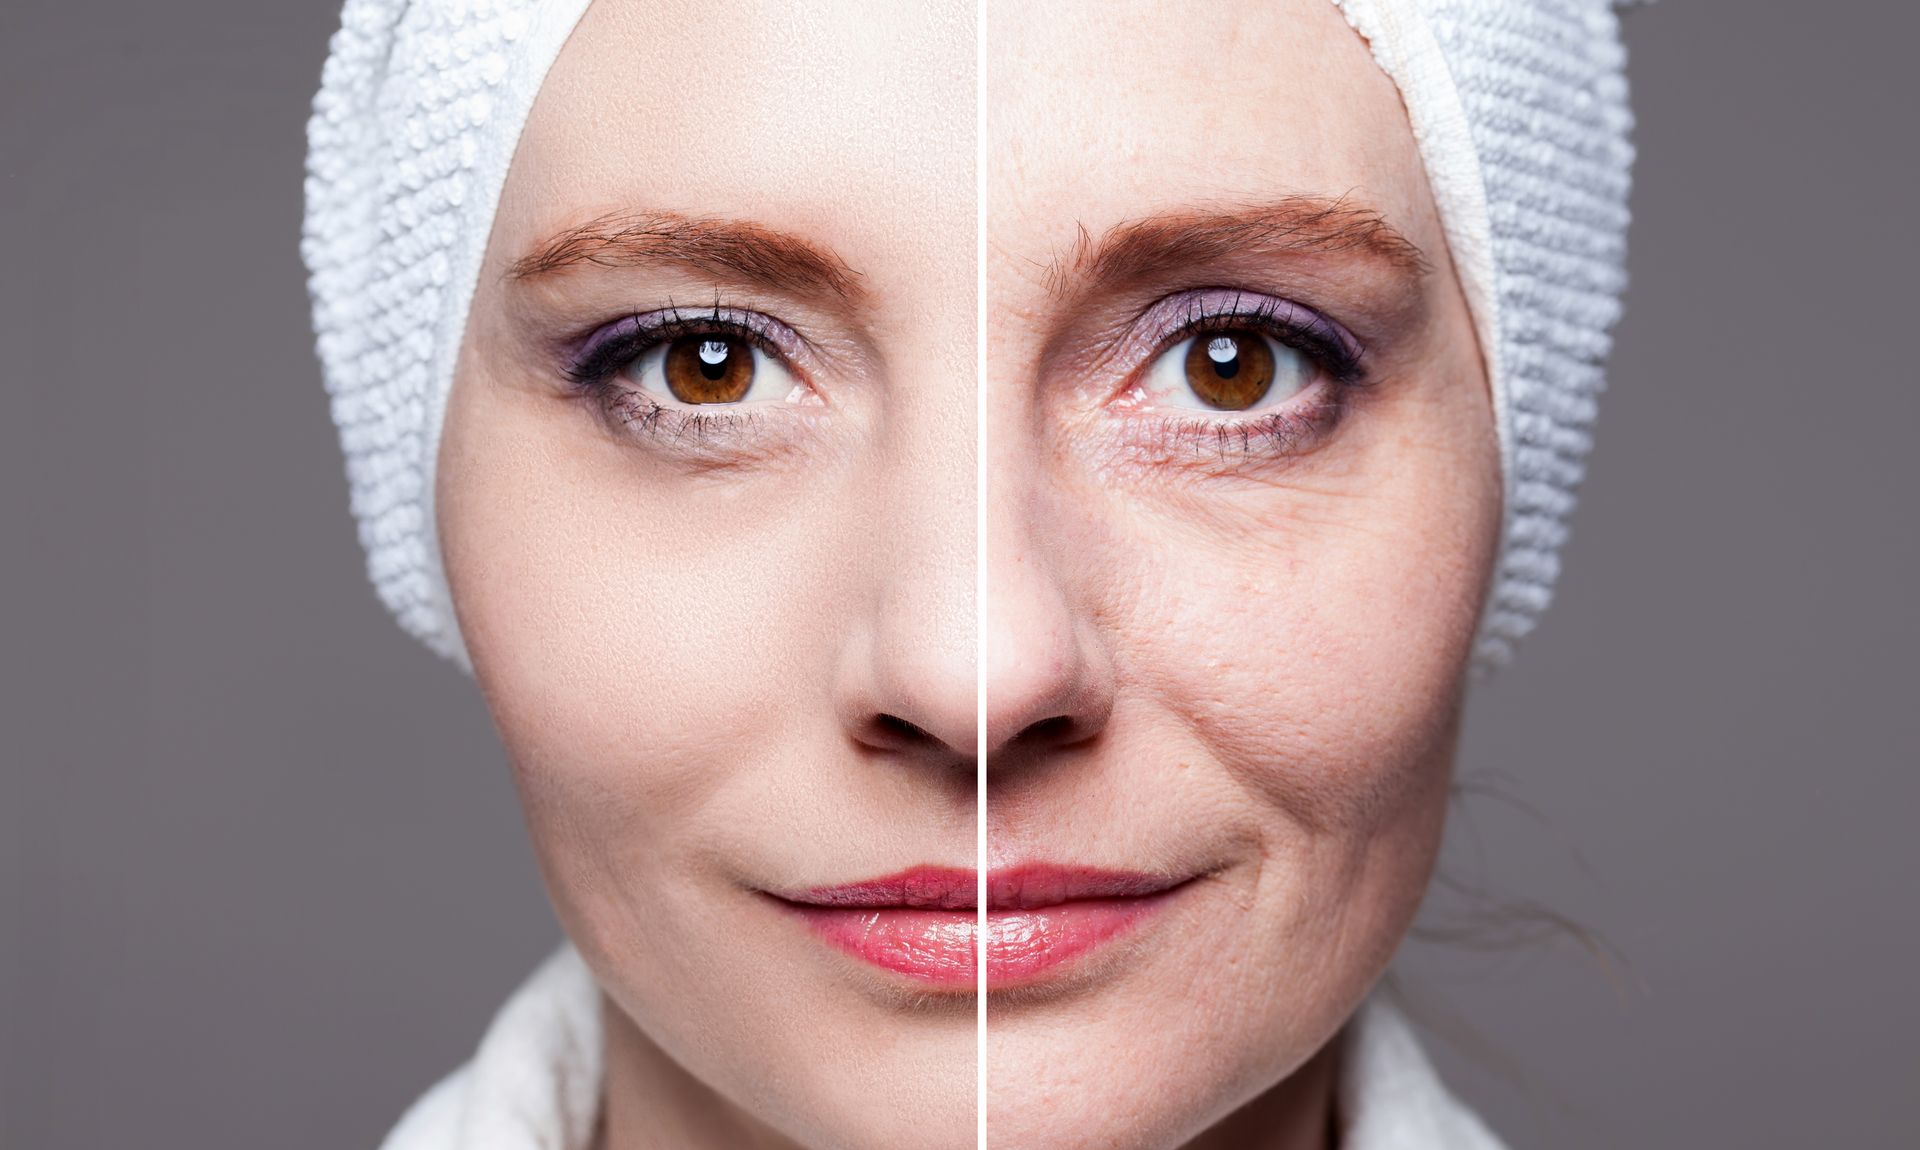 A before and after picture of a woman 's face with a towel on her head.